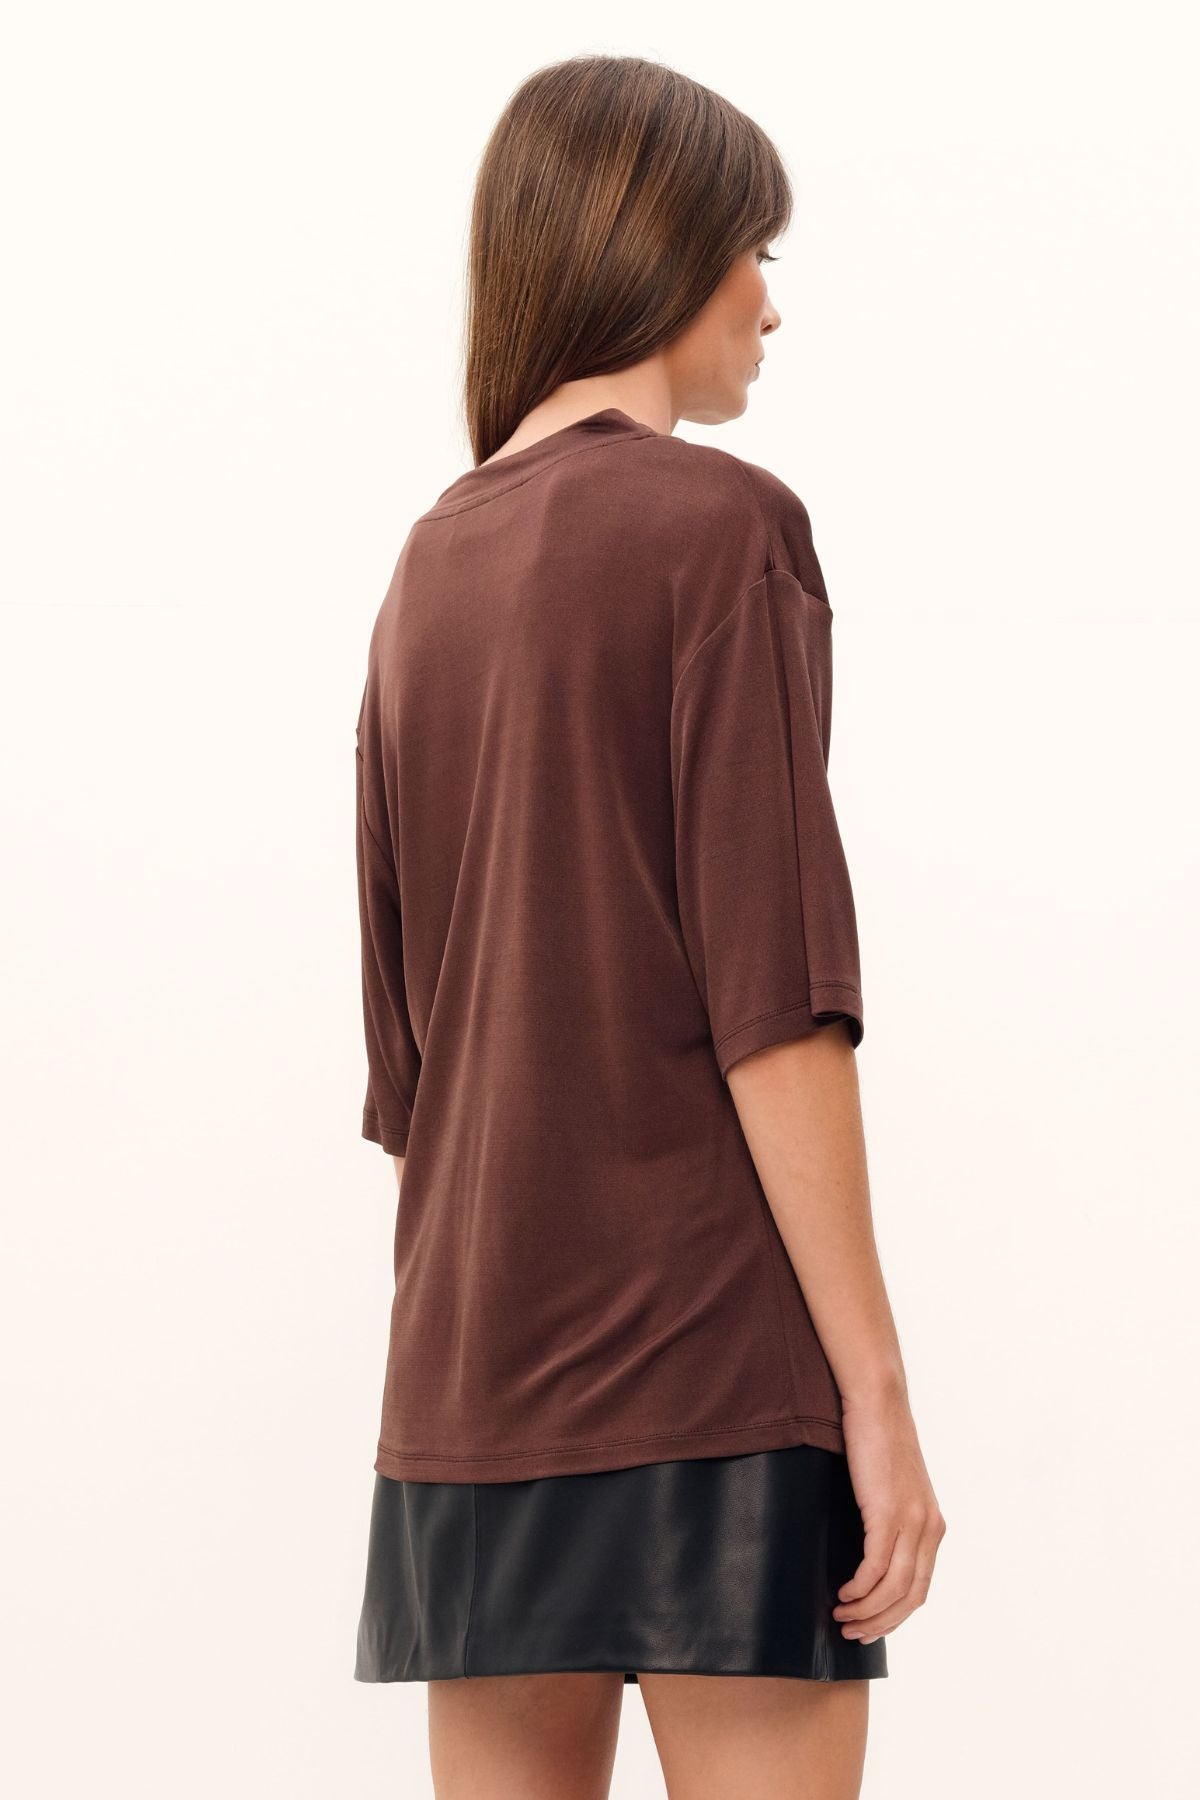 Exquisitely fashioned from silk viscose jersey in coco, the Aphrodite Top brings together a classic tee silhouette and luxurious fabric for a sleek, high-necked look.